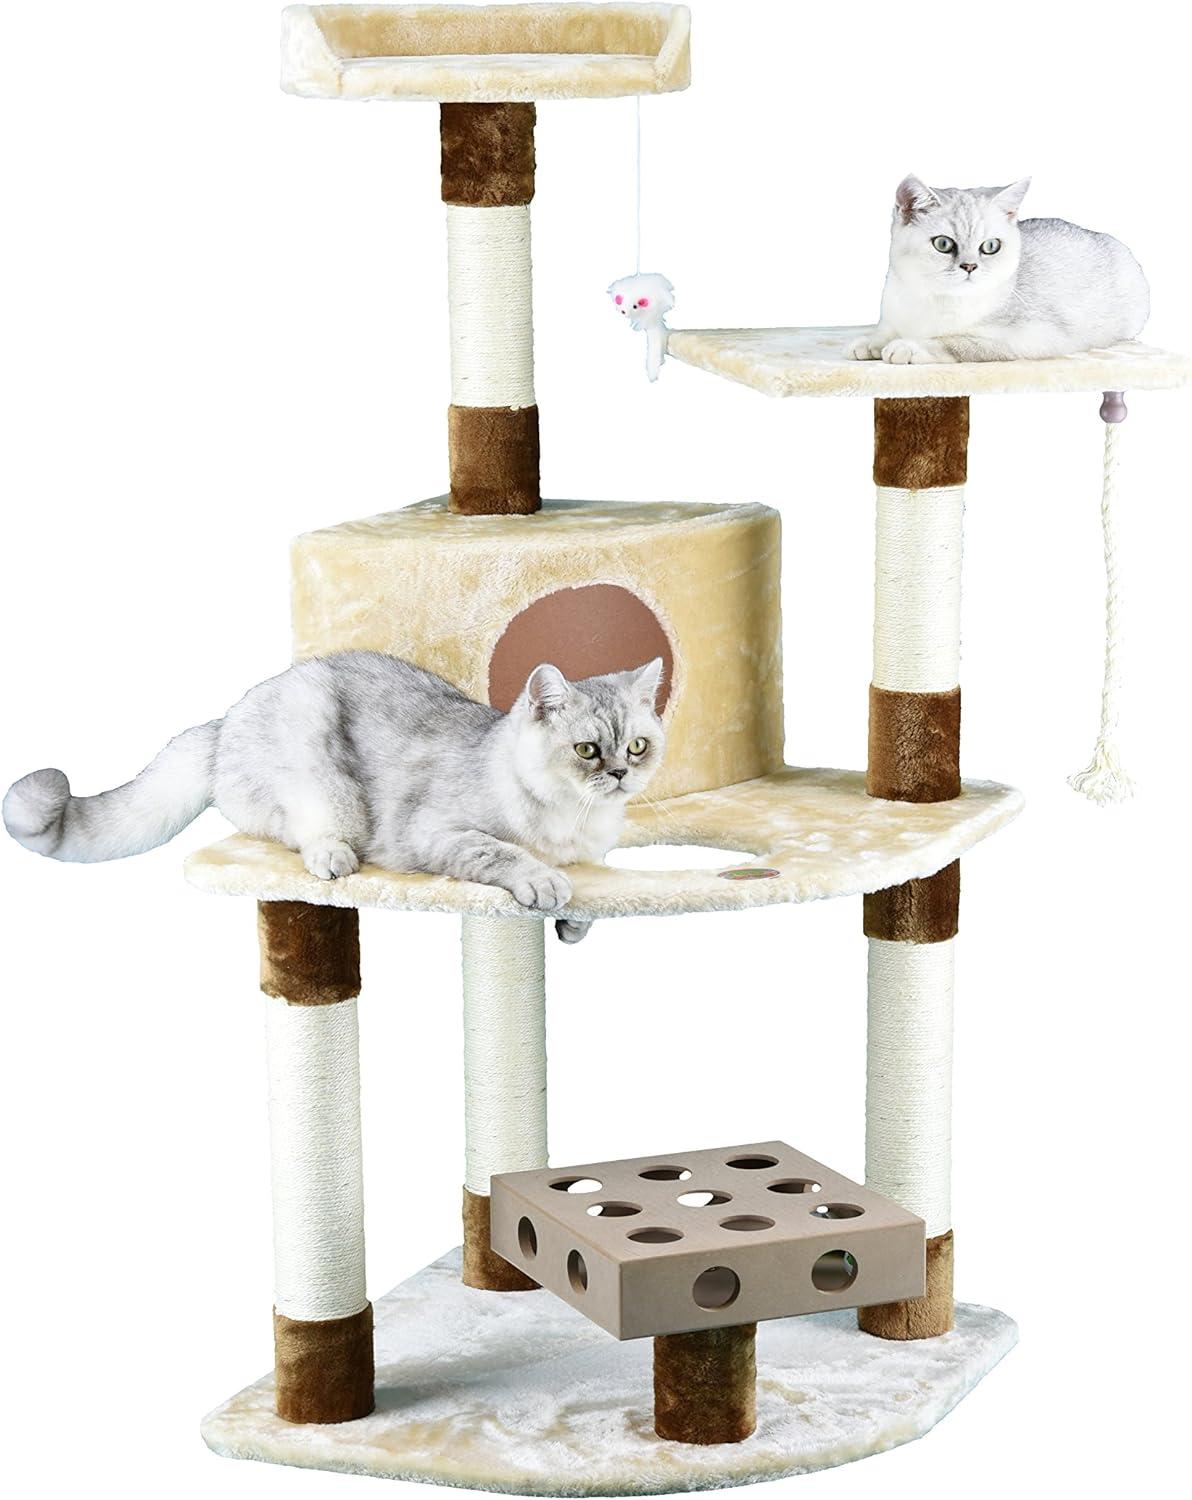 Go Pet Club IQ Busy Box Cat Tree Condo with Sisal Covered Scratching Posts SF056, 48" H